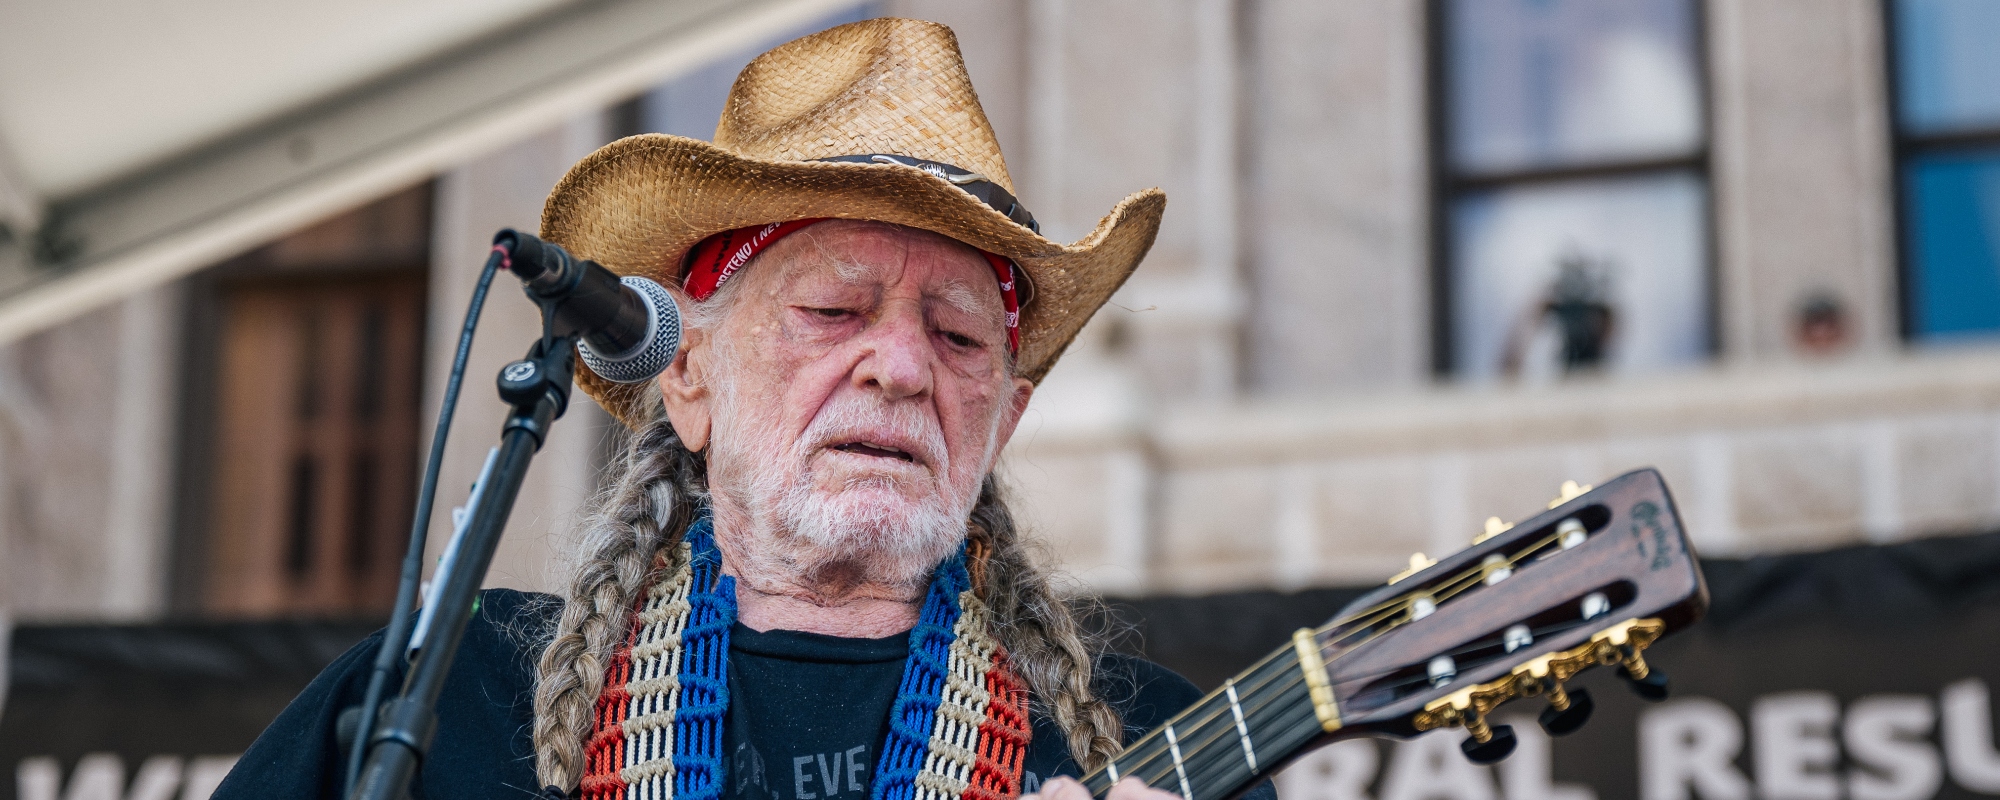 Historic 8-Foot Willie Nelson Statue Vandalized in Downtown Austin